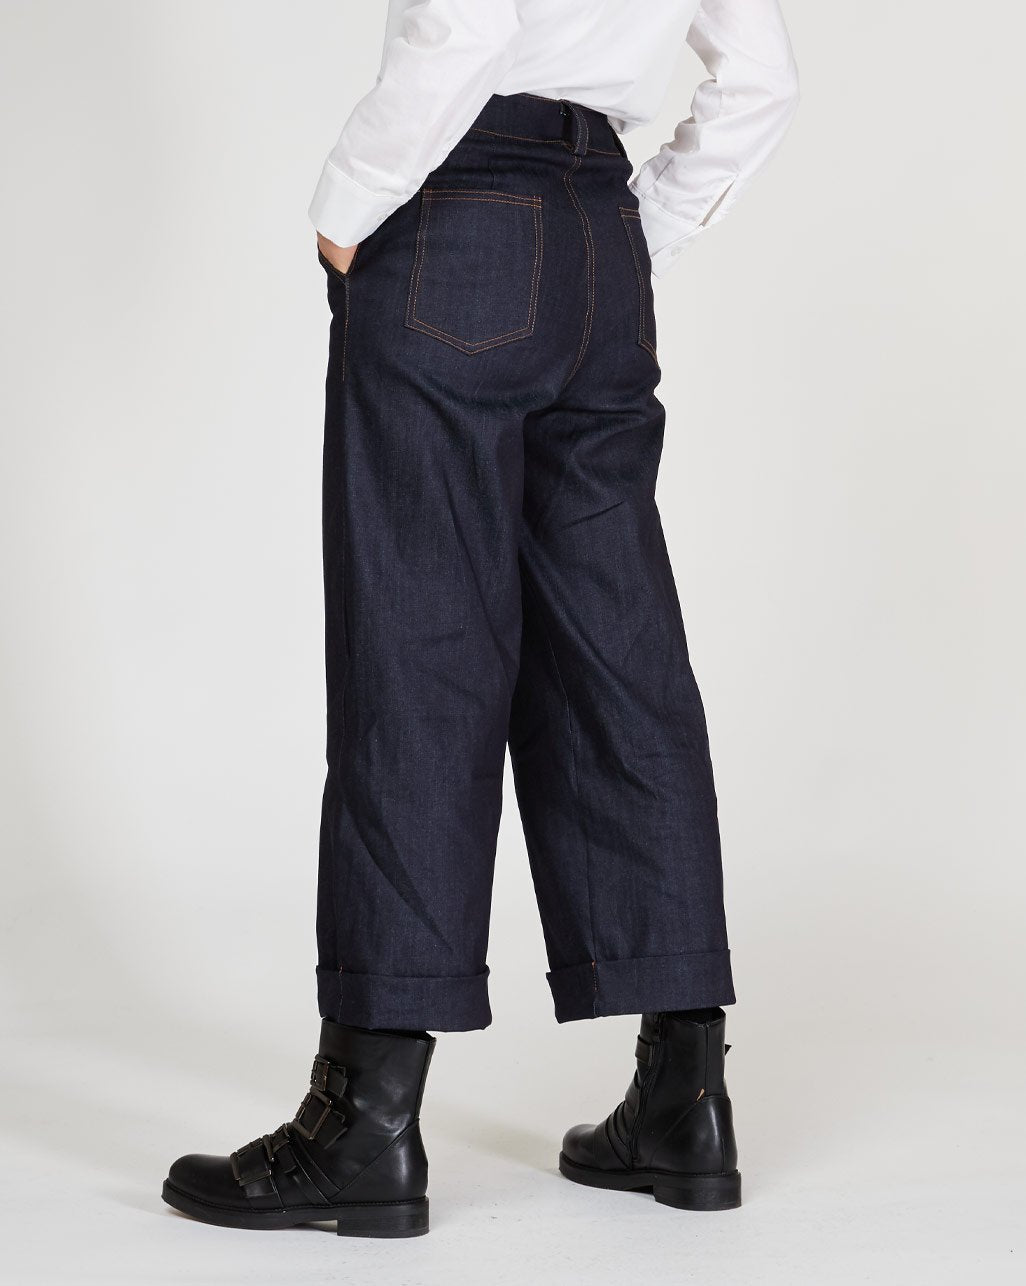 Wide Leg Cuffed Denim Trousers
Our Classic Wide Leg Pants are essential this season. Will add sophisticated flare to any look while remaining comfortable and super chic. Details: Mid-rise Button Closure Wide bottoms Full length Fit: Wide fit Fabric: Organic-dyed, medium weight, sturdy cotton with a soft and refined finish. Made in Italy
Wide Leg Cuffed Denim Trousers
Classic Wide Leg Pants are essential this season. Will add sophisticated flare to any look while remaining comfortable & super chic. Mid-rise,